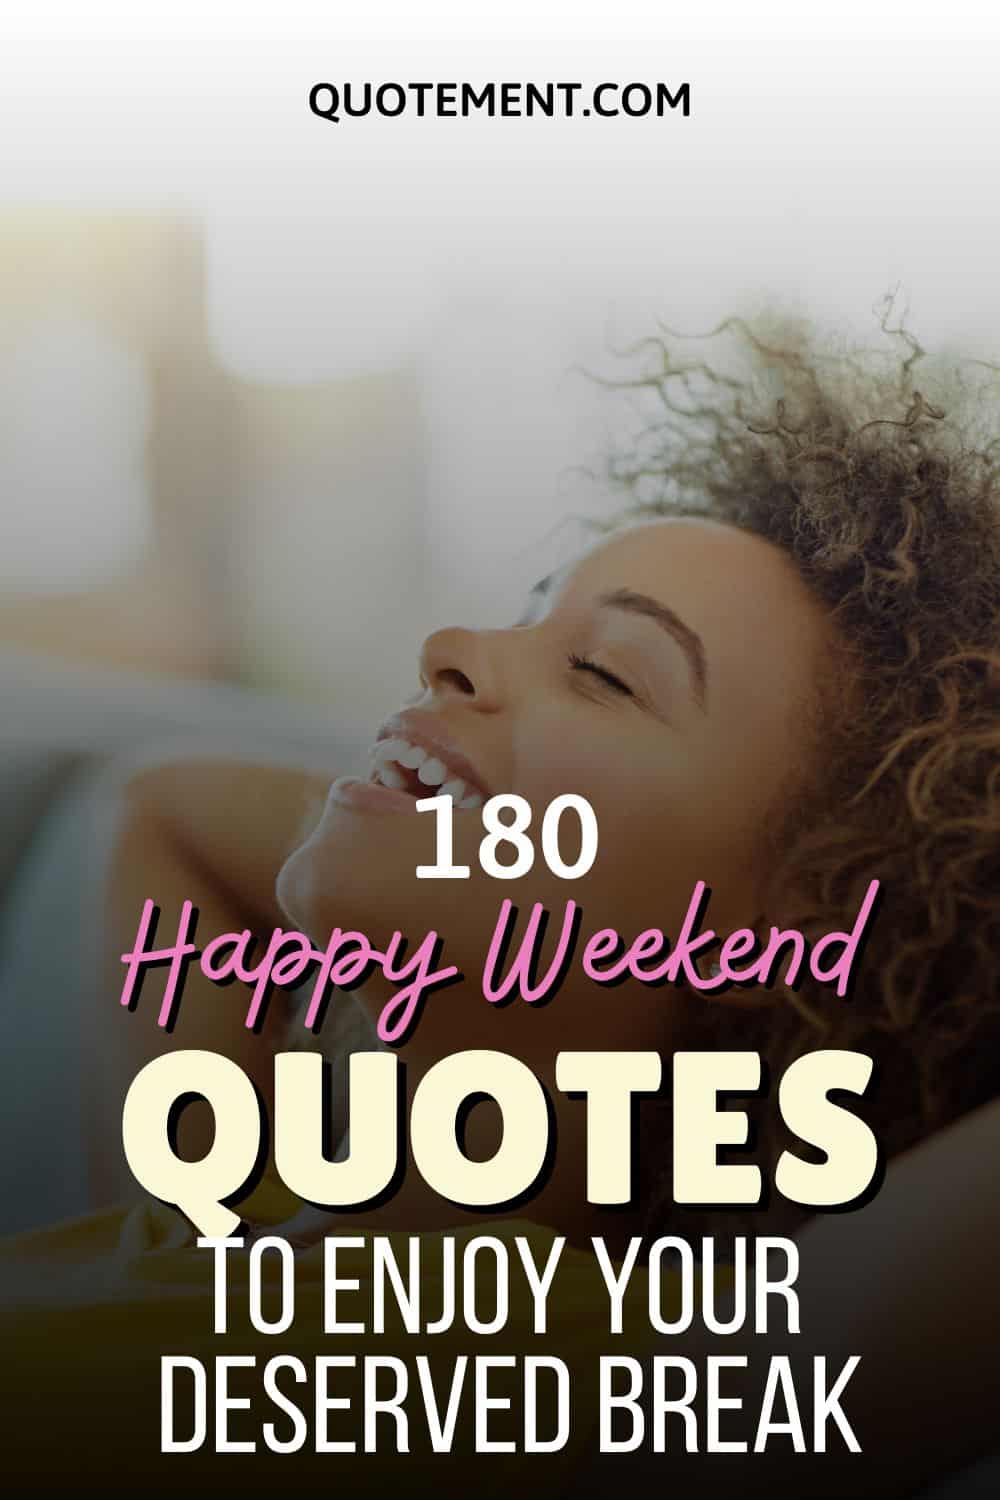 180 Happy Weekend Quotes To Enjoy Your Deserved Break
